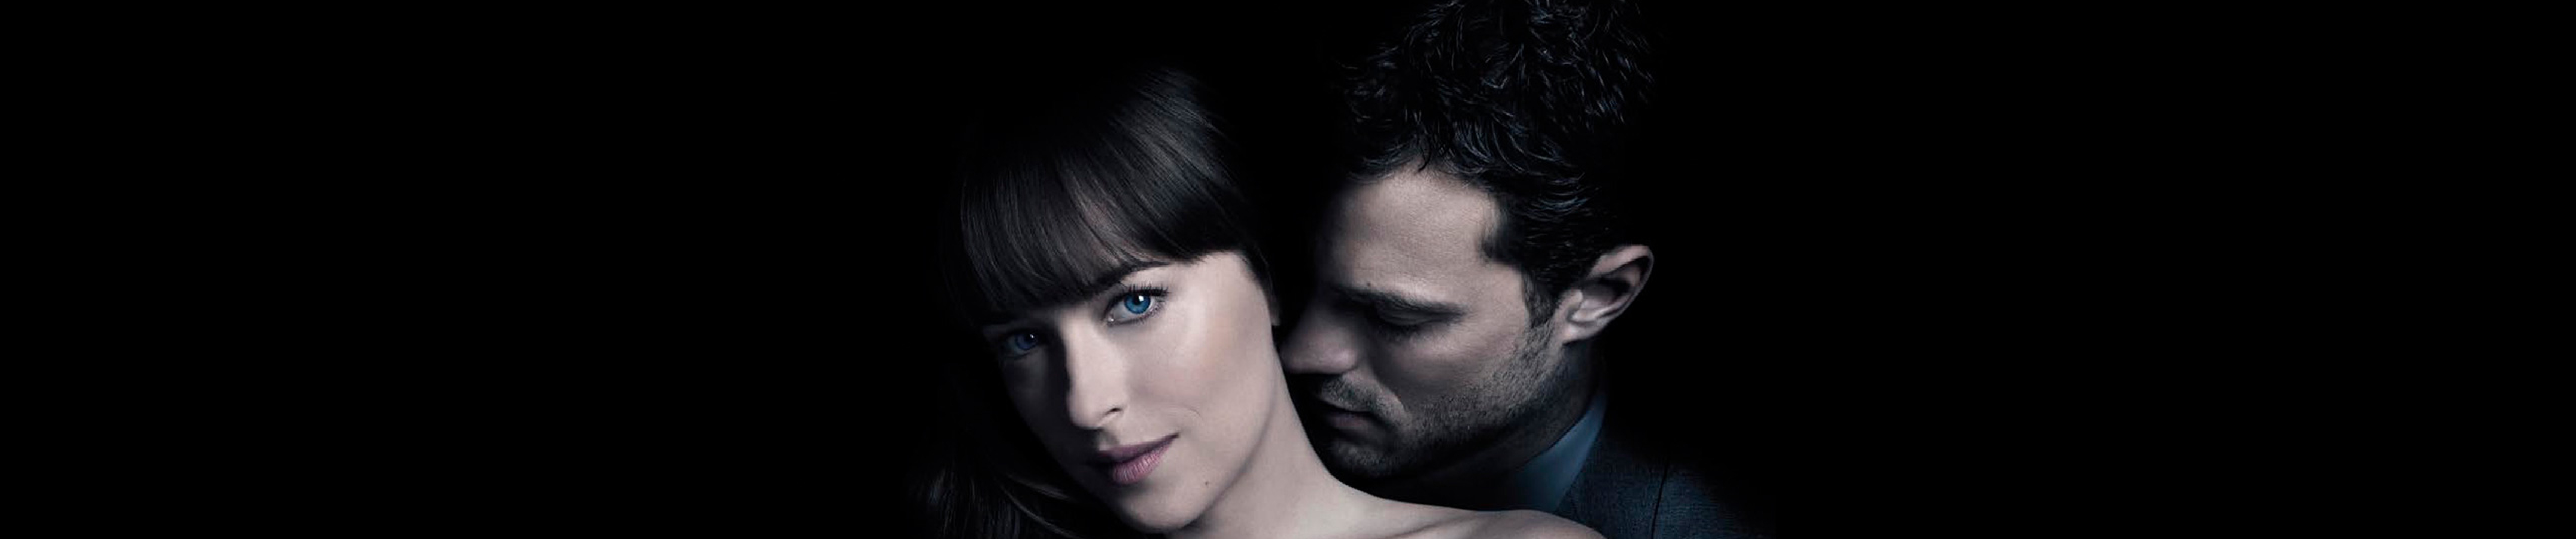 6880x1440 Resolution Fifty Shades Freed 2018 6880x1440 Resolution Wallpaper Wallpapers Den 